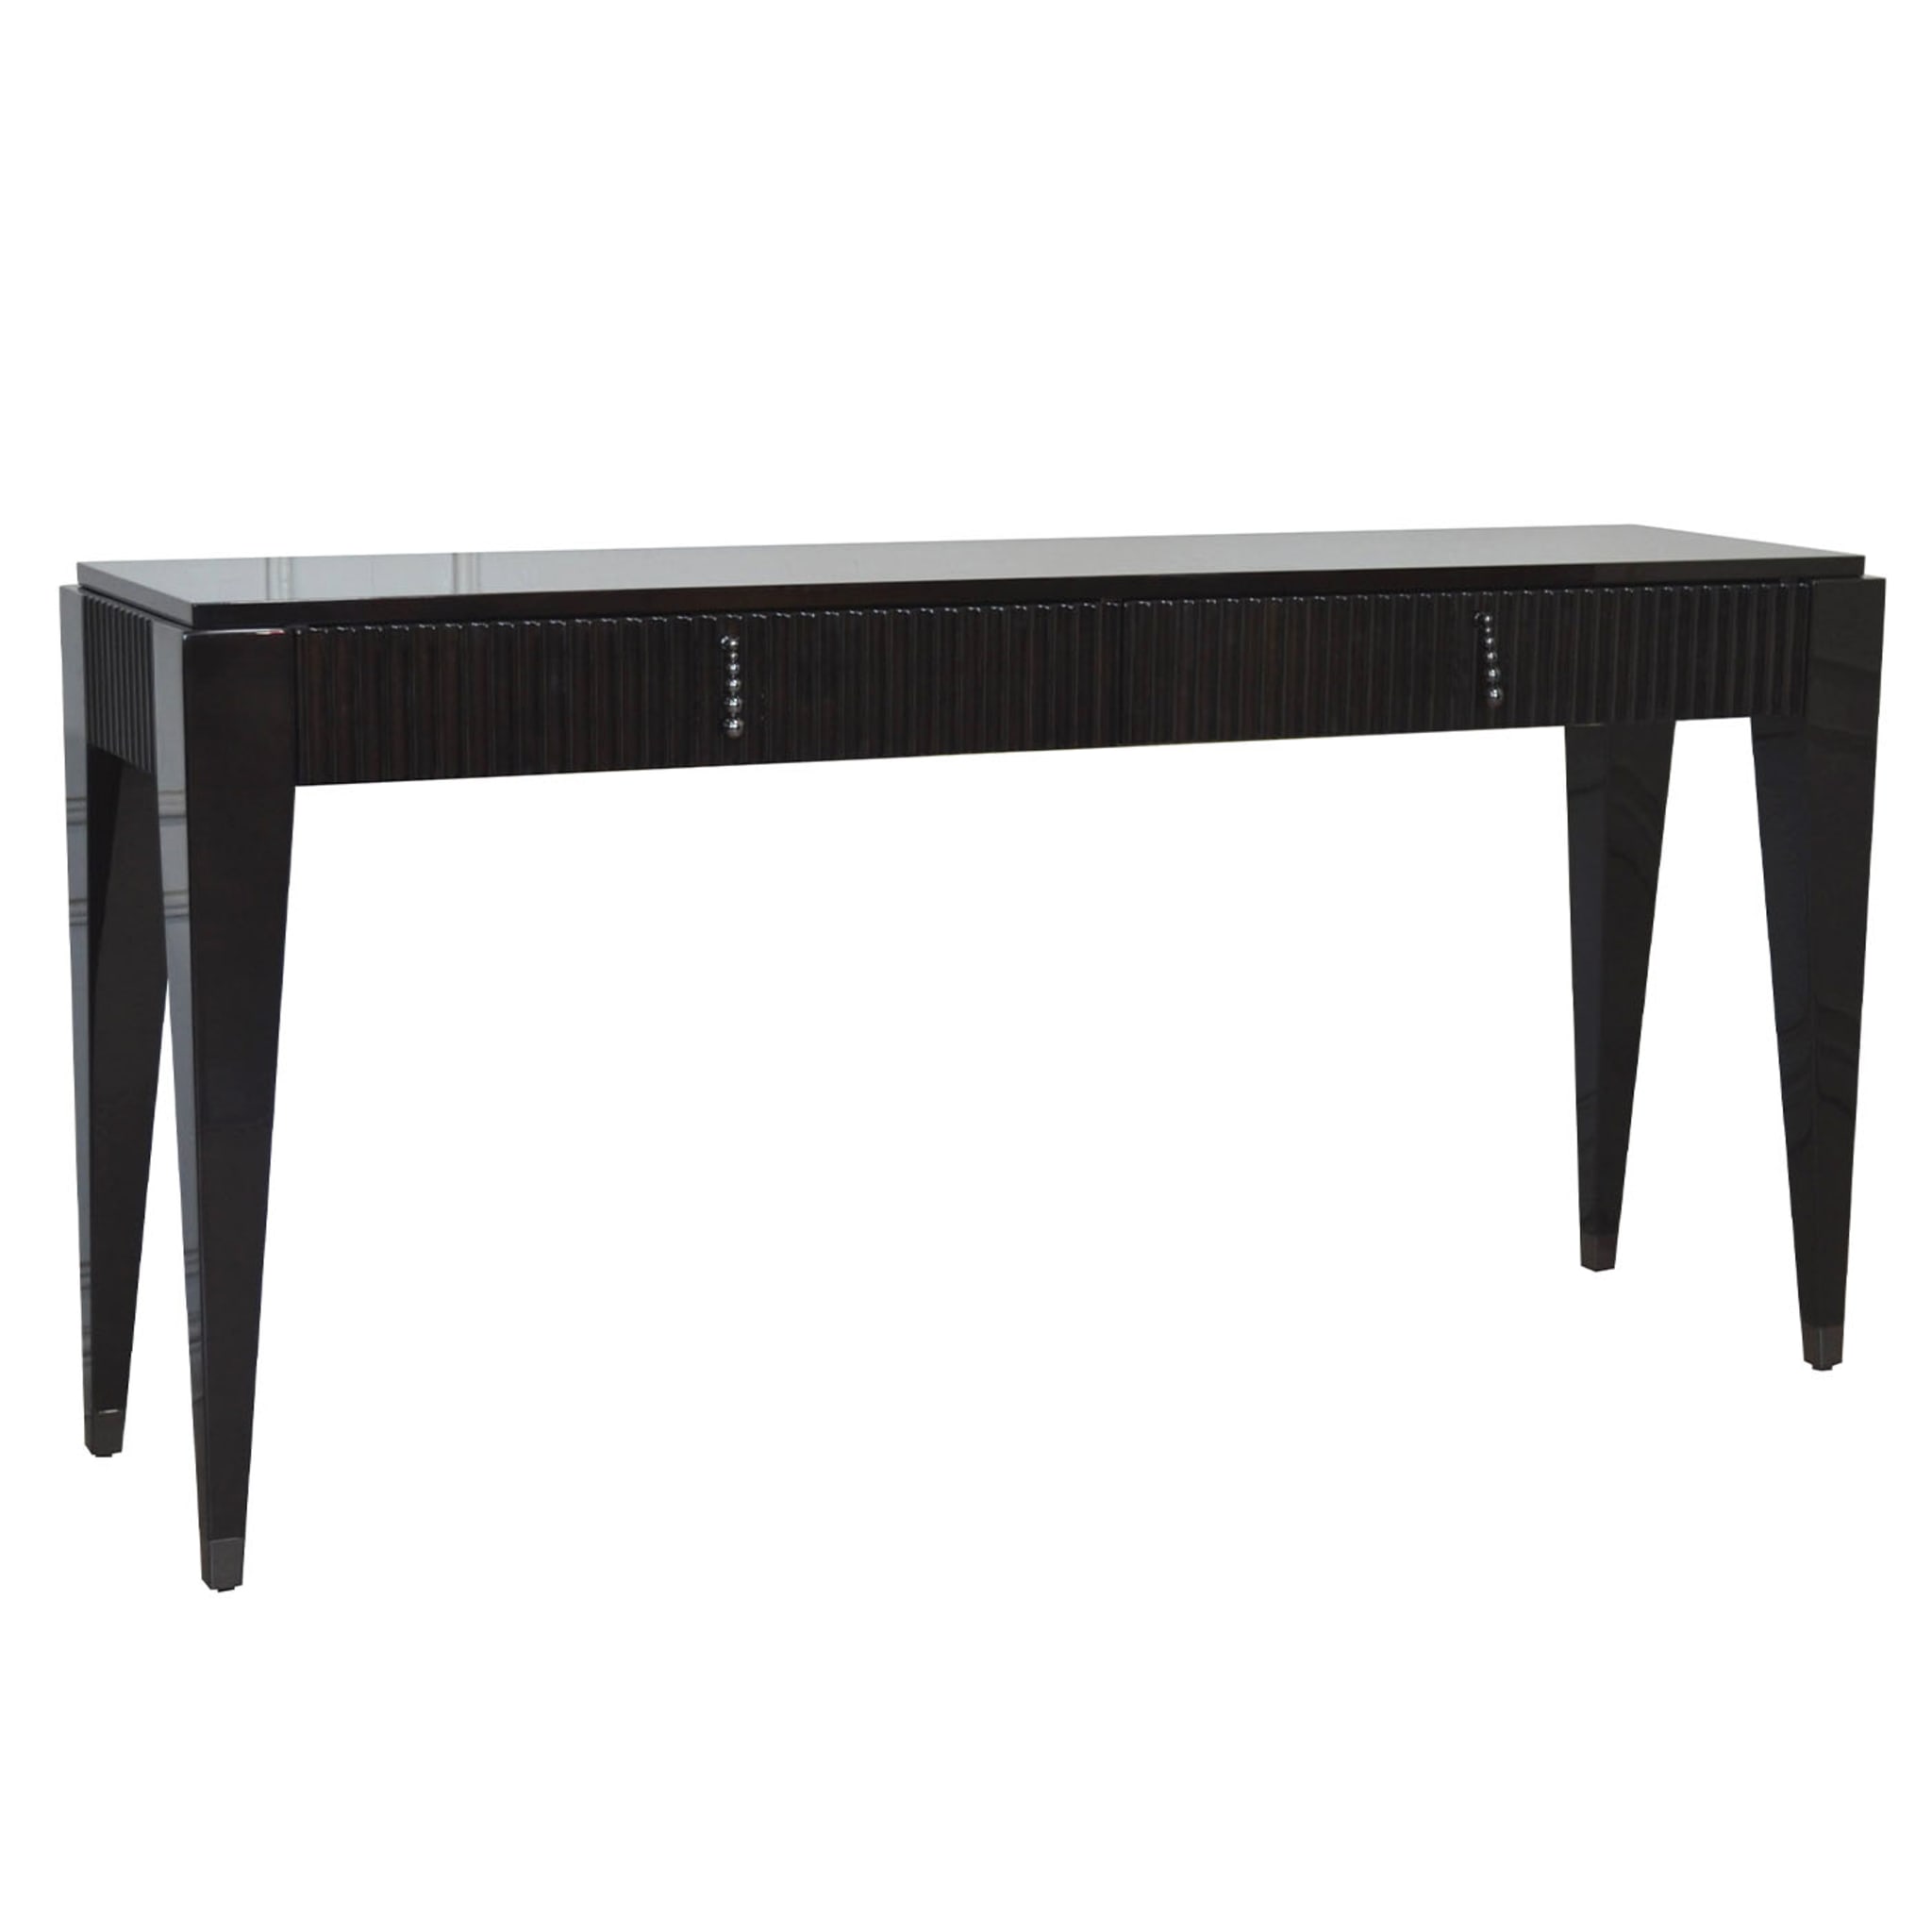  ‘Klab D’ Contemporary Ebony High-Gloss Writing Desk with Leather Top - Alternative view 1